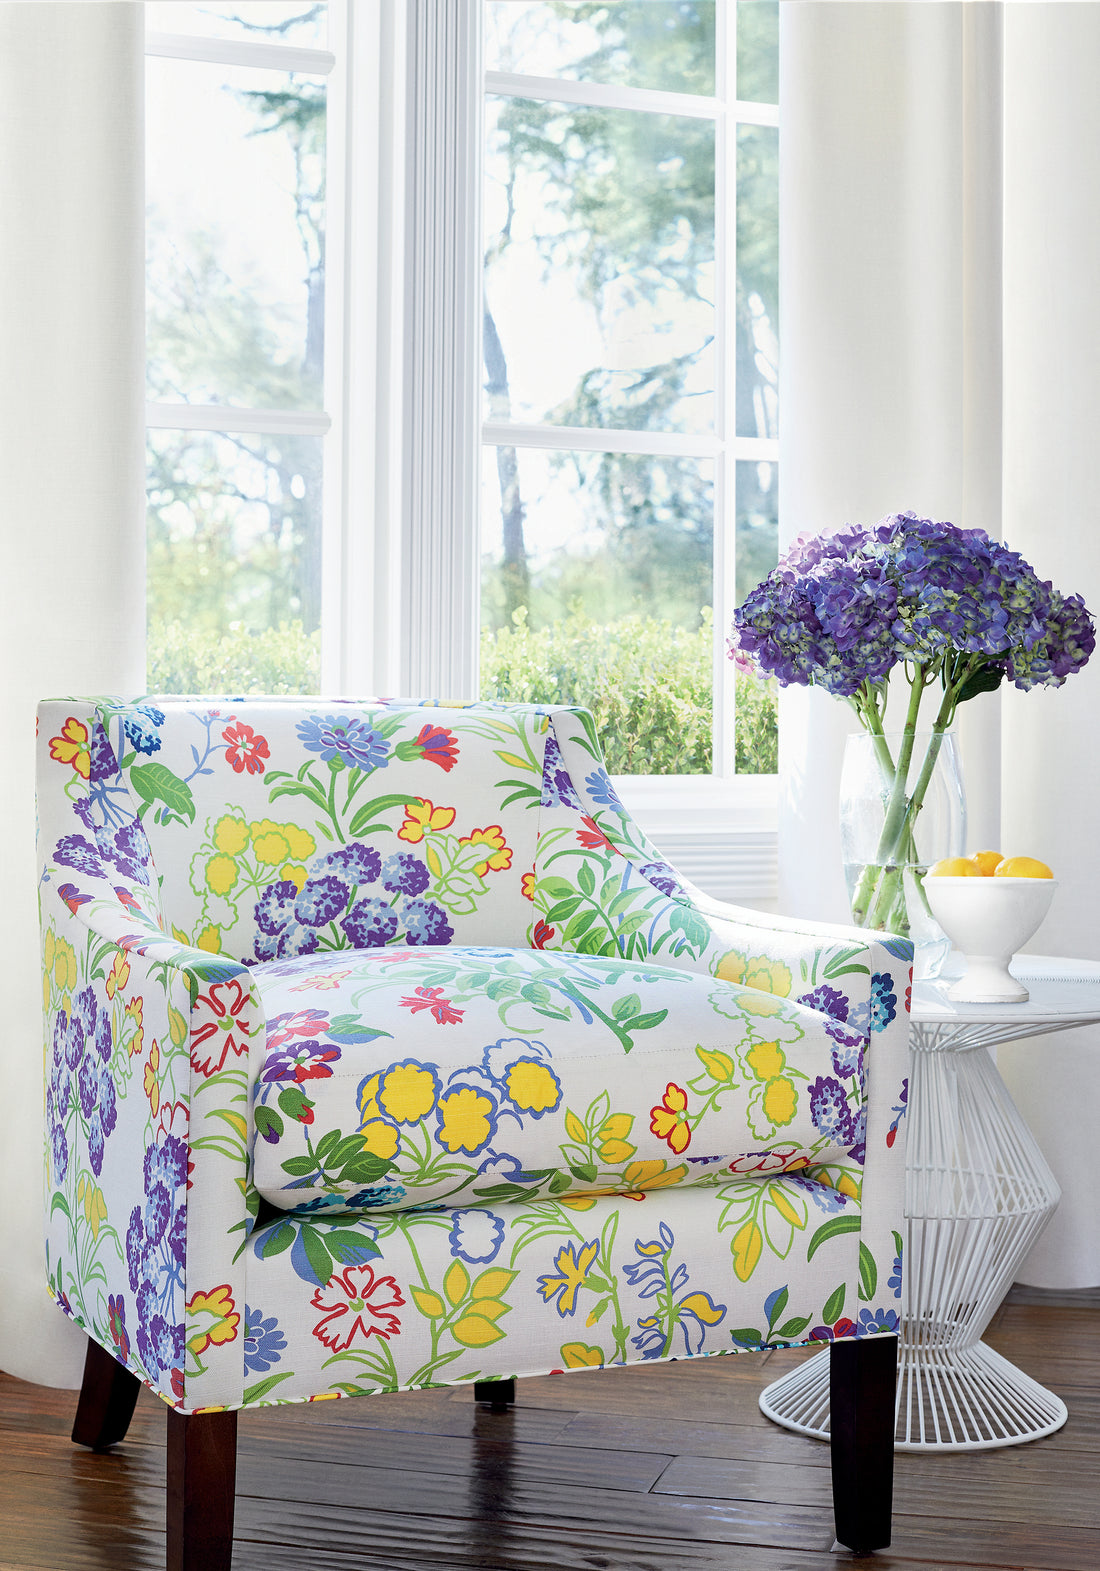 Everett Chair upholstered in Thibaut Spring Garden printed fabric in Brights color pattern F914341